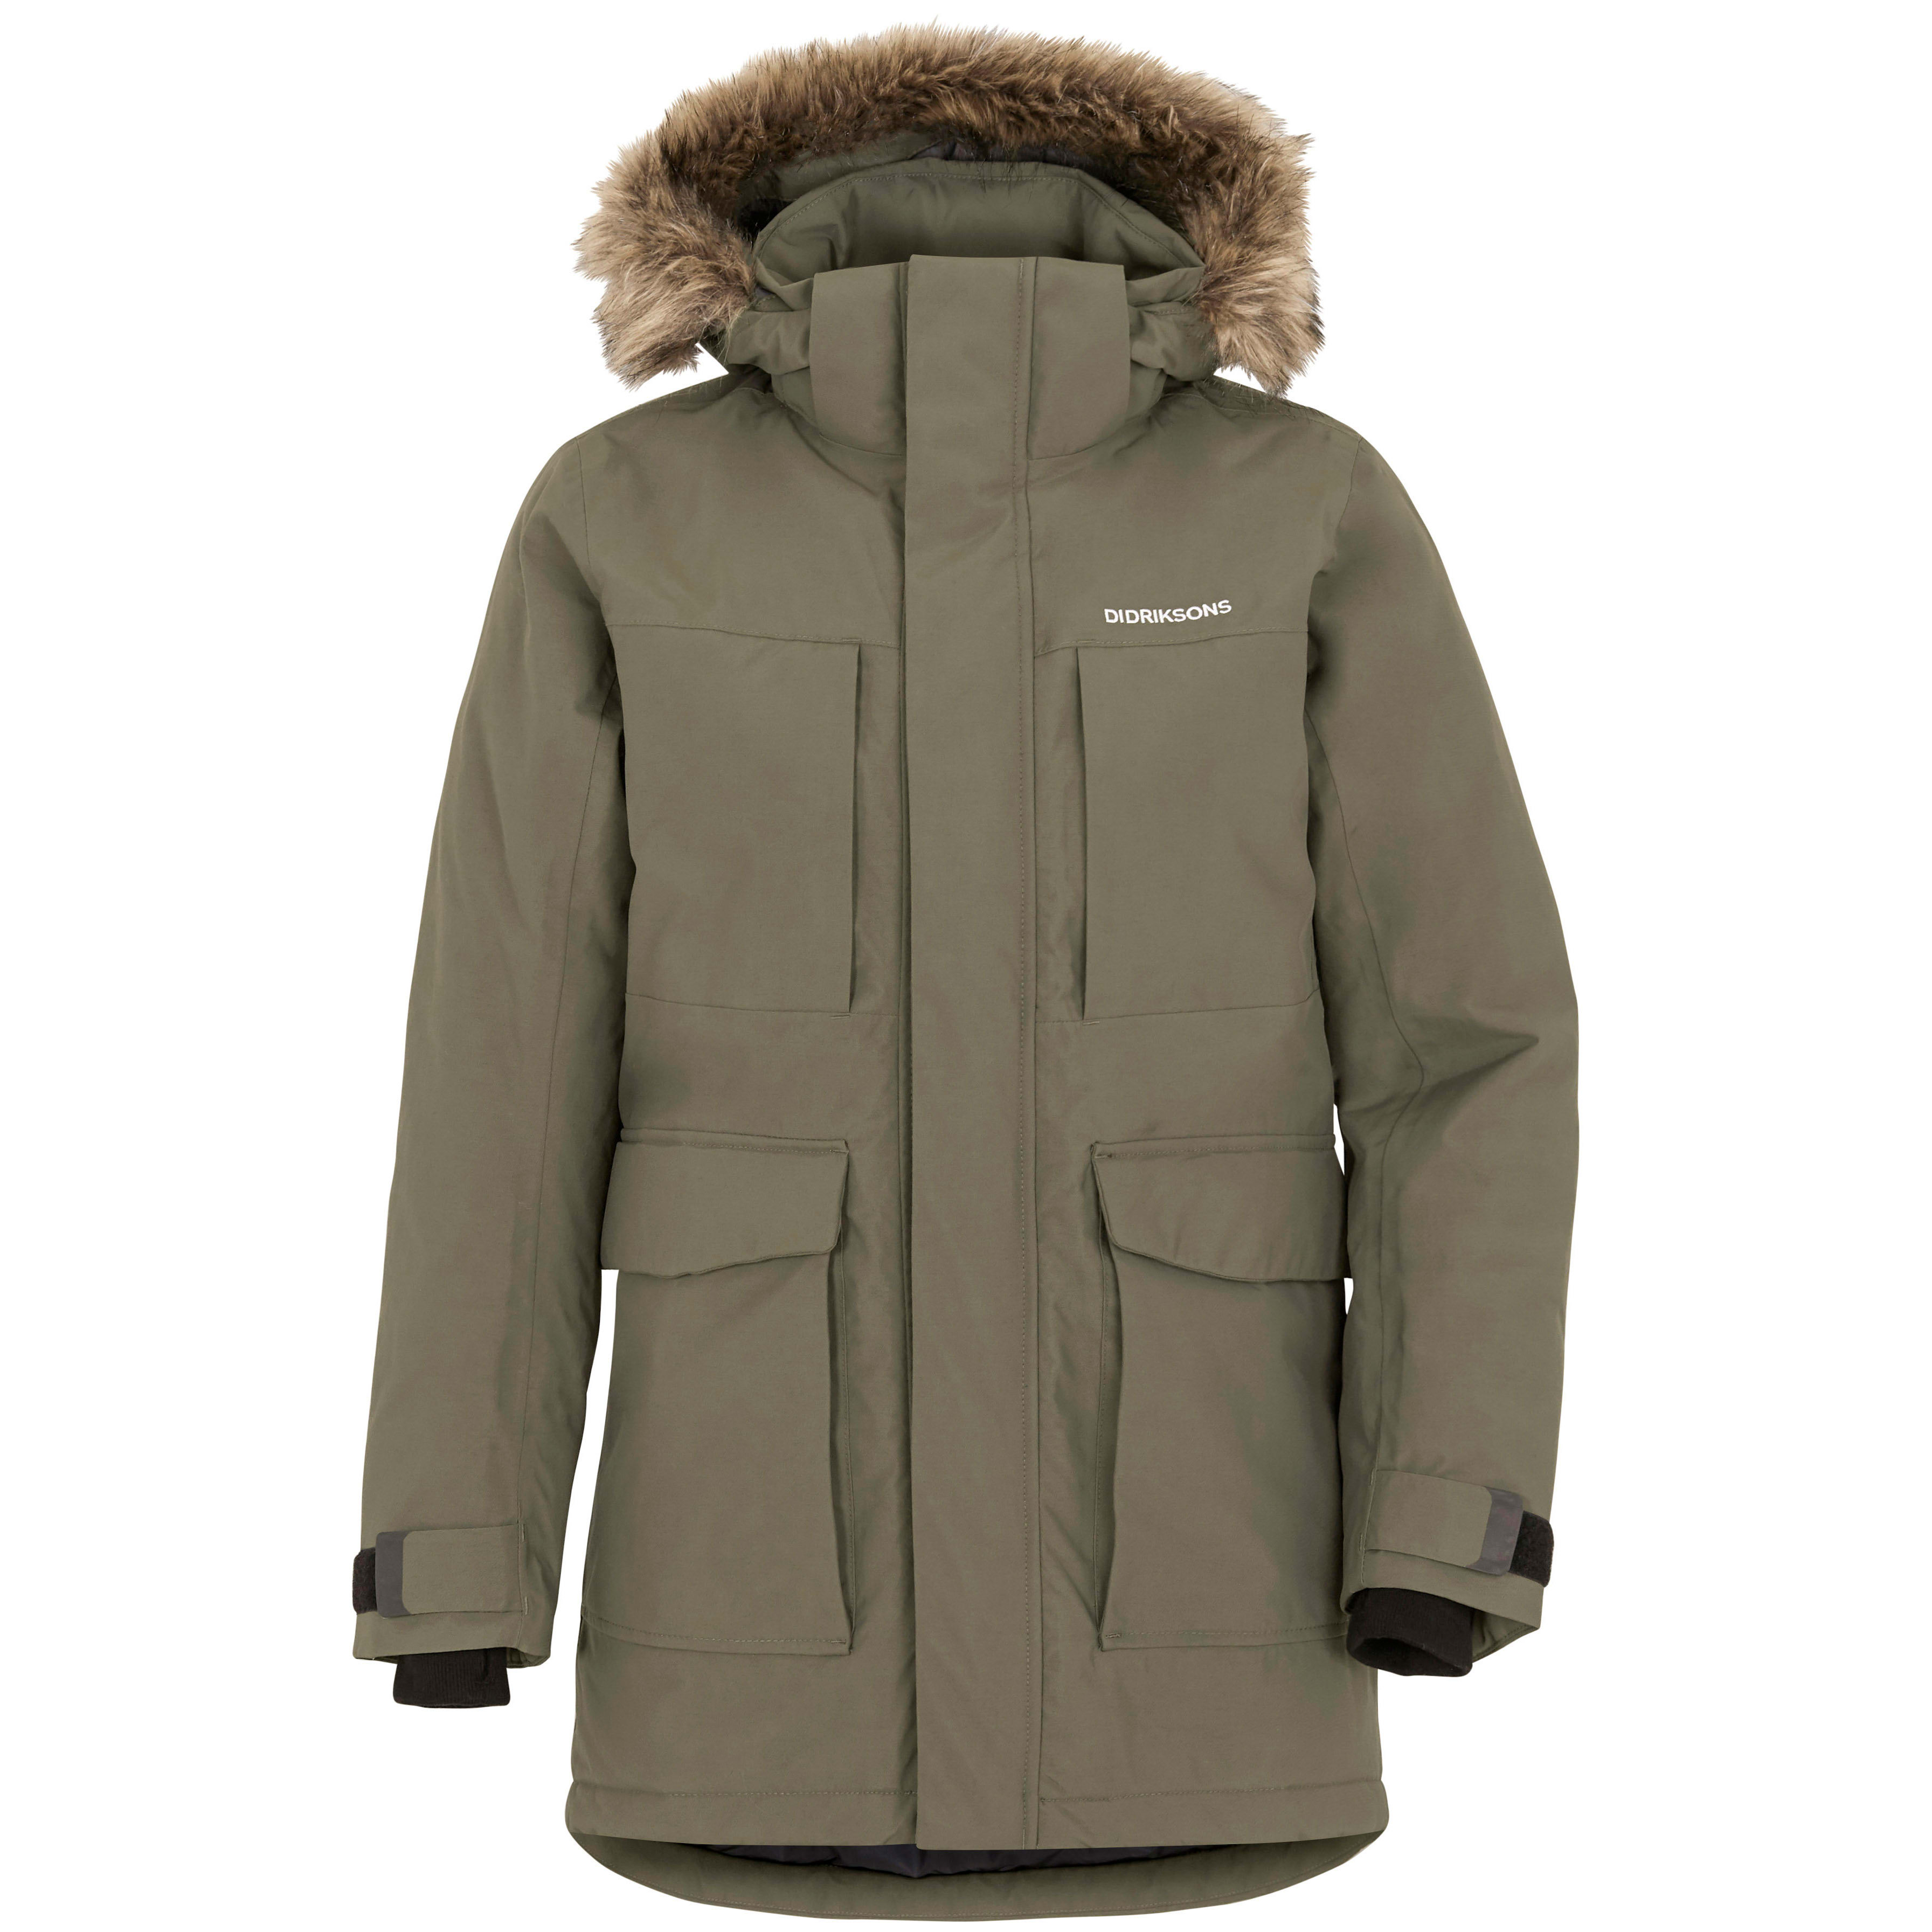 Buy Didriksons Madi Boys Parka 2 from Outnorth